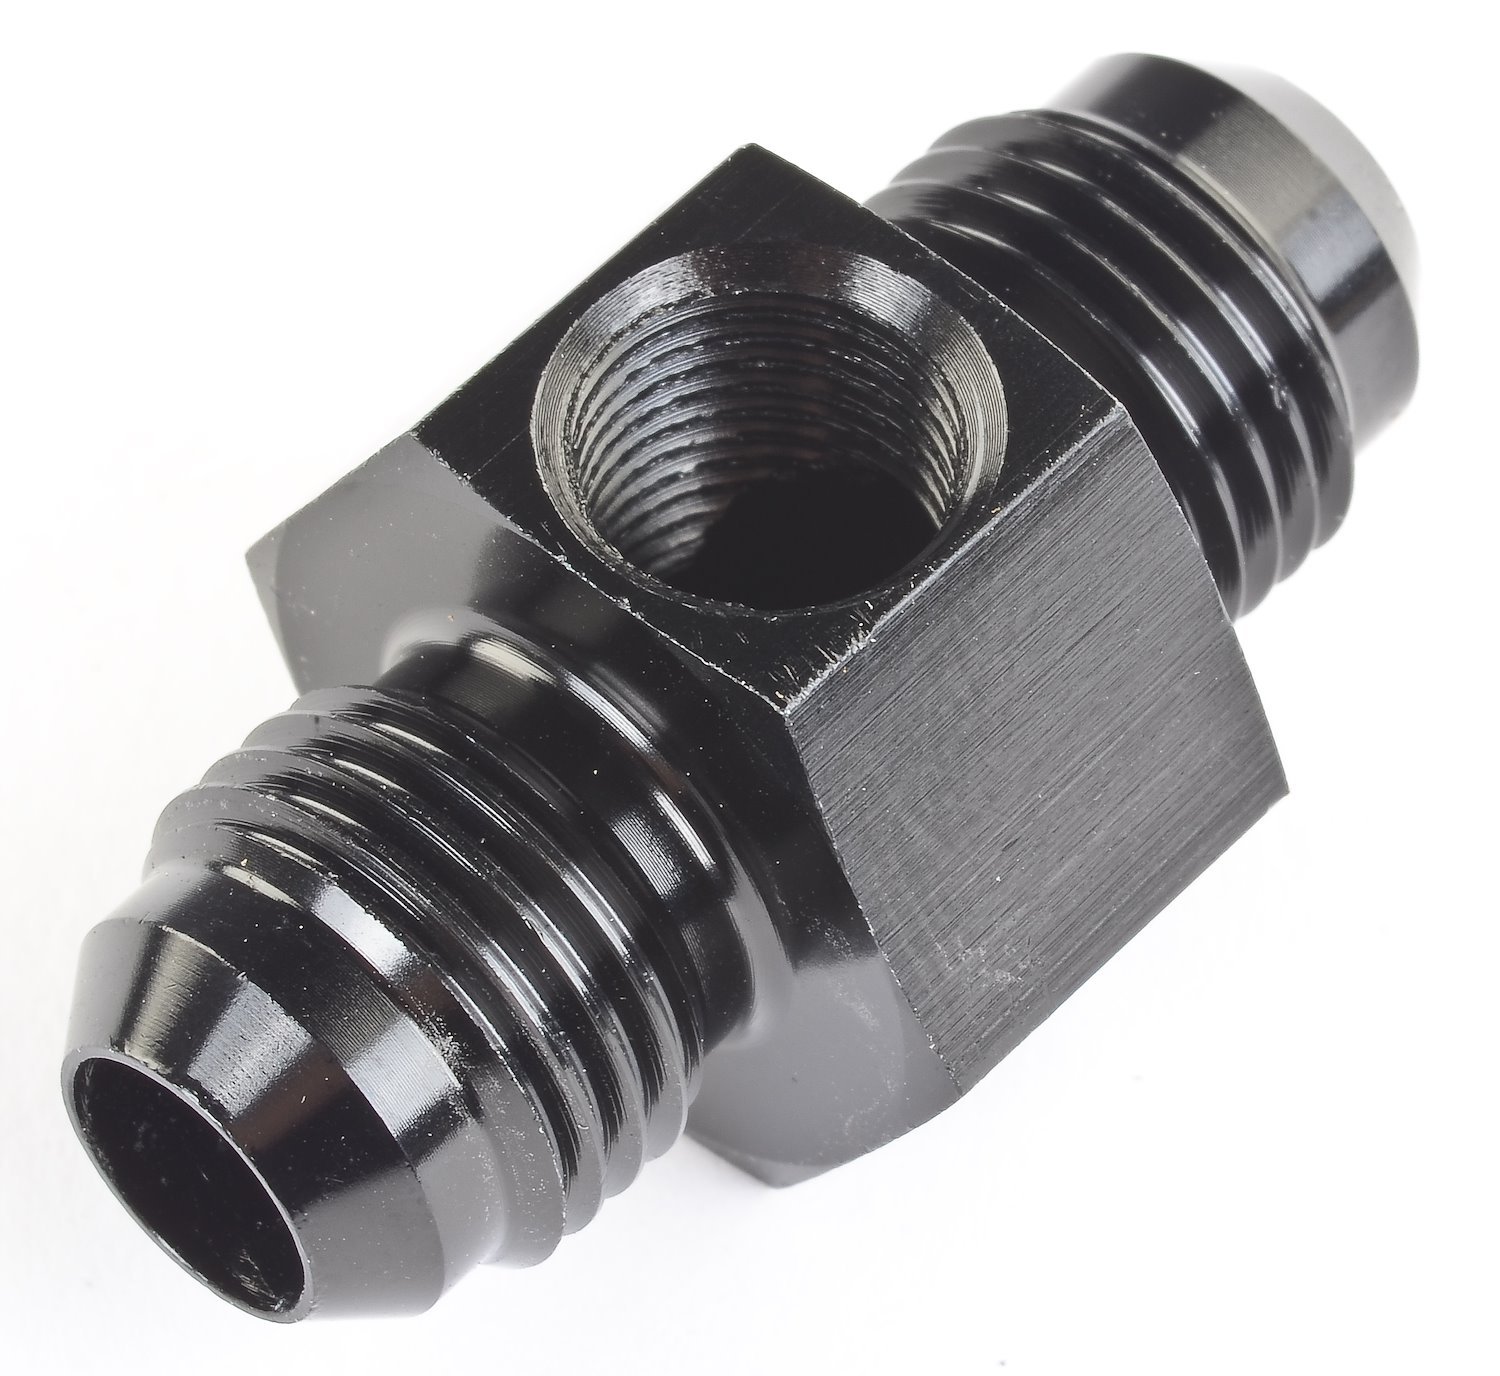 Fuel Pressure Adapter Fitting -6AN Union